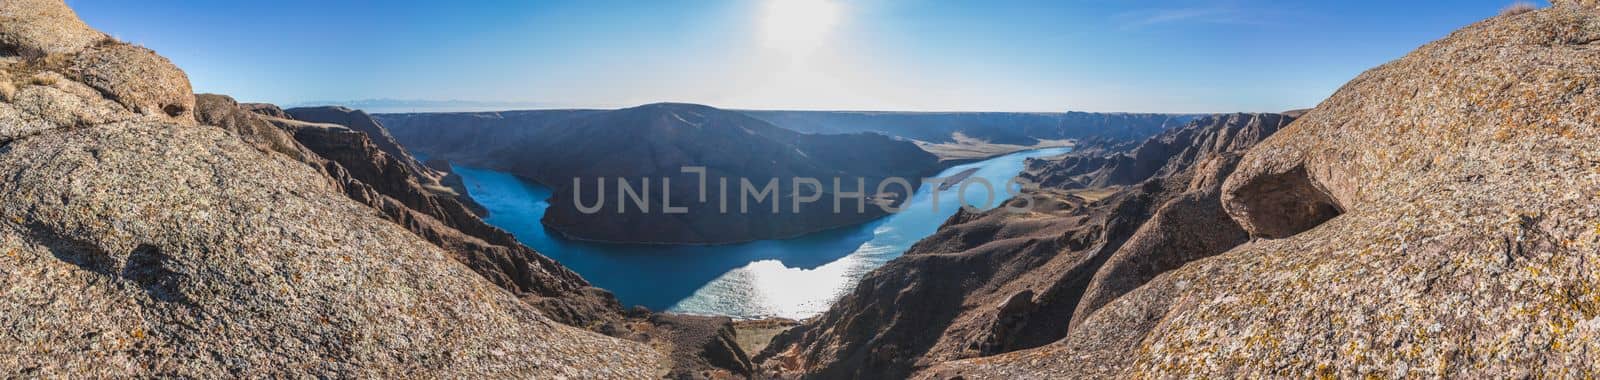 Panorama on River view in rocky gorge, Central asian nature landscape in Almaty region of Kazakhstan by Rom4ek